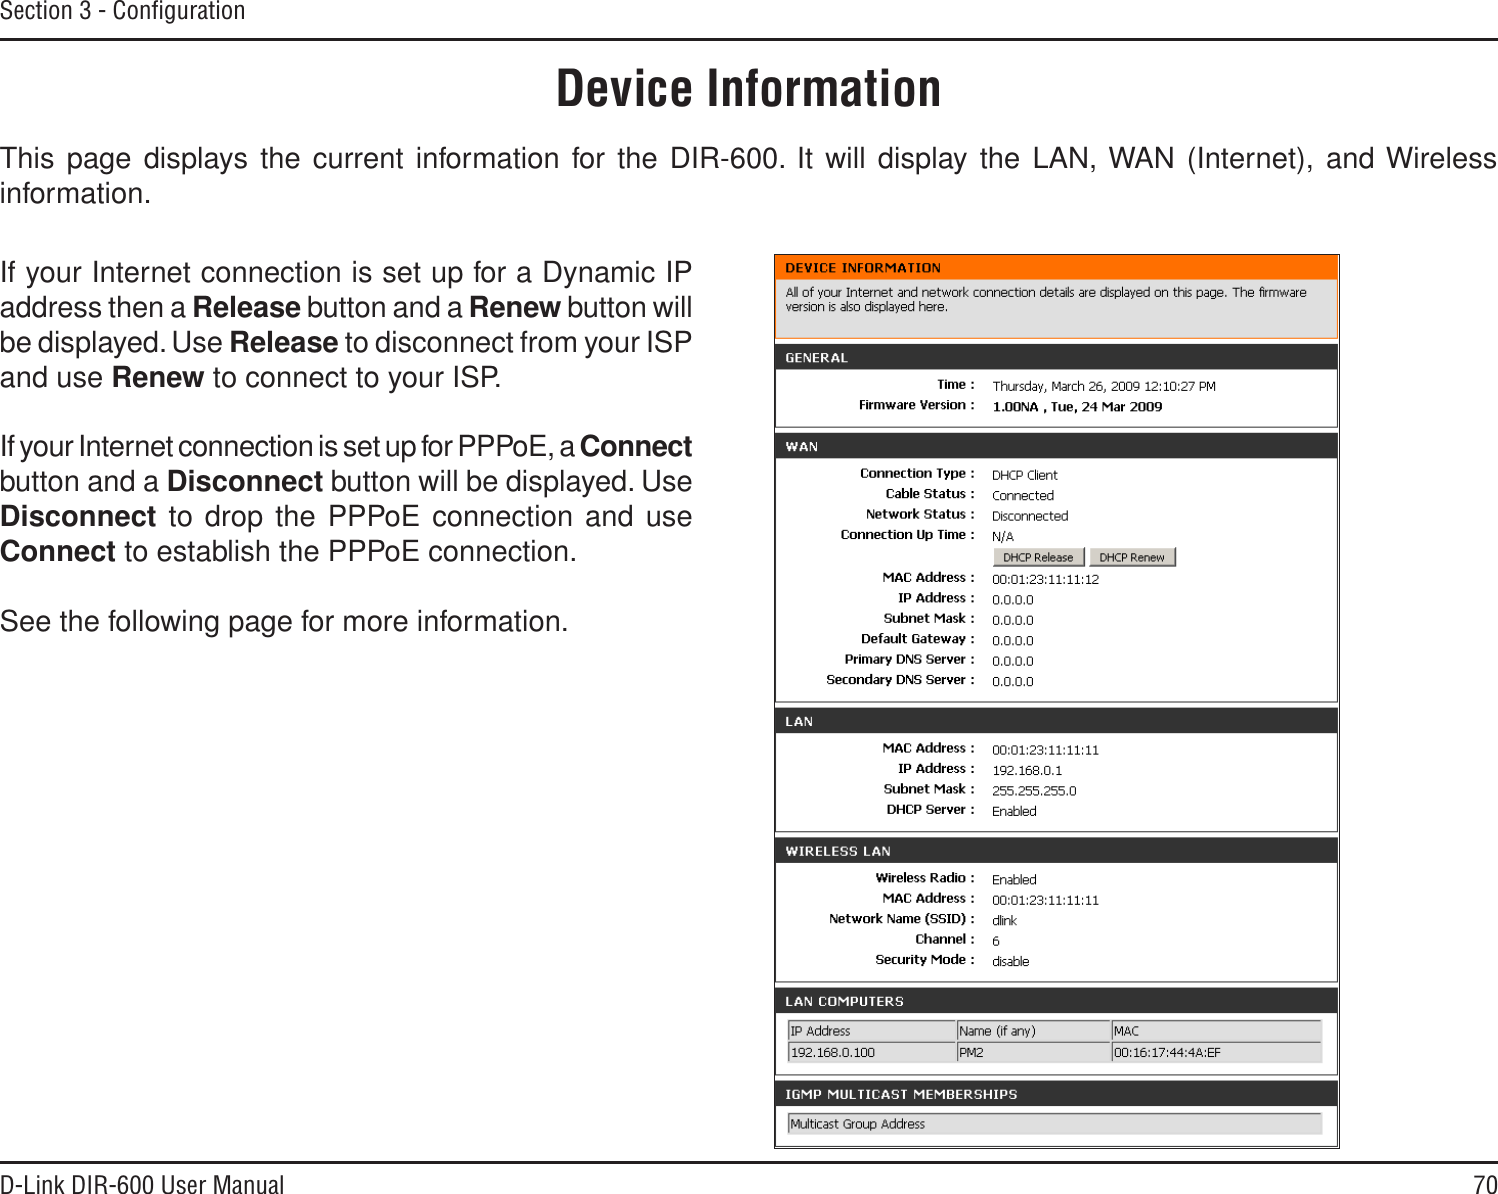 70D-Link DIR-600 User ManualSection 3 - ConﬁgurationThis page displays the current information for the DIR-600. It will display the LAN, WAN (Internet), and Wireless information.Device InformationIf your Internet connection is set up for a Dynamic IP address then a Release button and a Renew button will be displayed. Use Release to disconnect from your ISP and use Renew to connect to your ISP. If your Internet connection is set up for PPPoE, a Connectbutton and a Disconnect button will be displayed. Use Disconnect to drop the PPPoE connection and use Connect to establish the PPPoE connection.See the following page for more information.